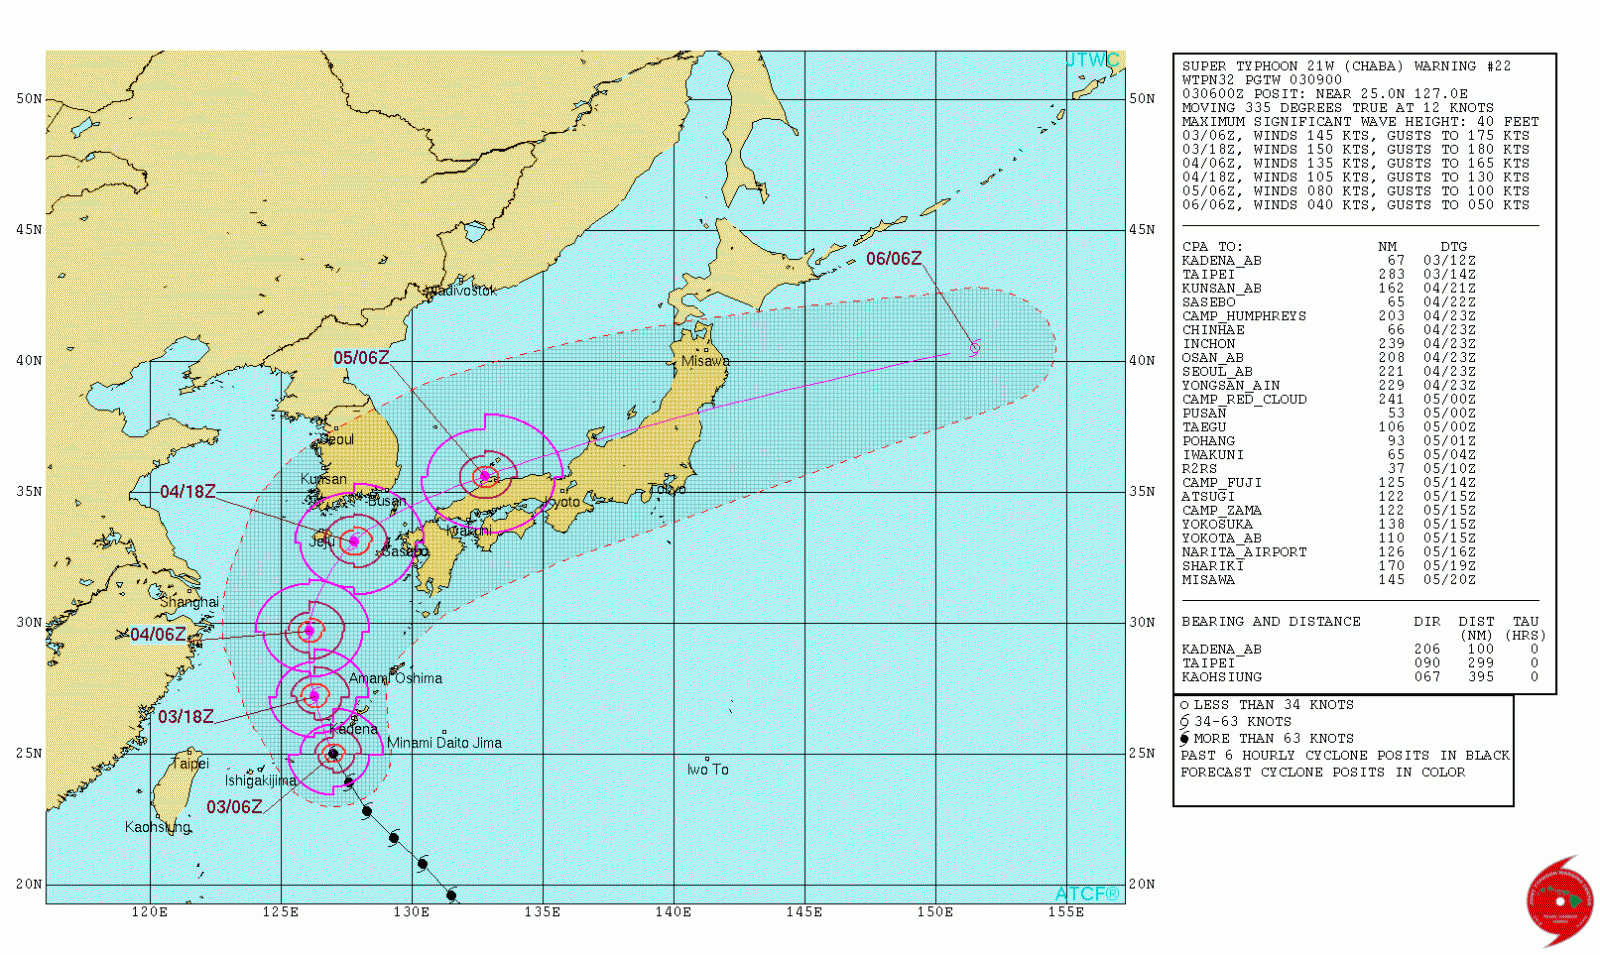 Super Typhoon Chaba forecast track by JTWC at 09:00 UTC on October 3, 2016